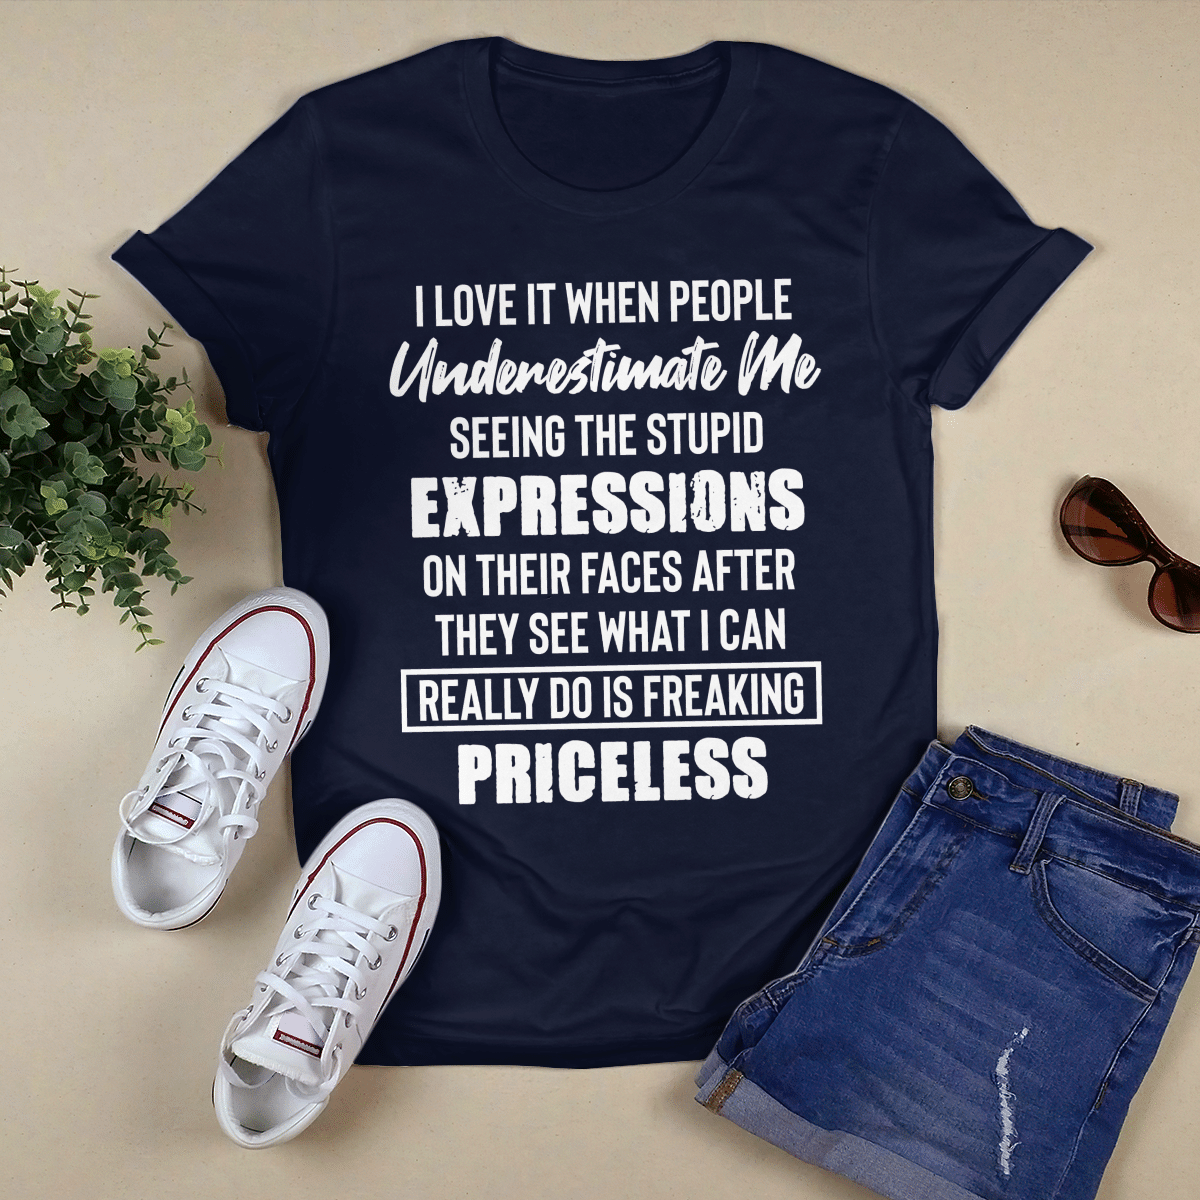 I Love It When People Underestimate Me shirt